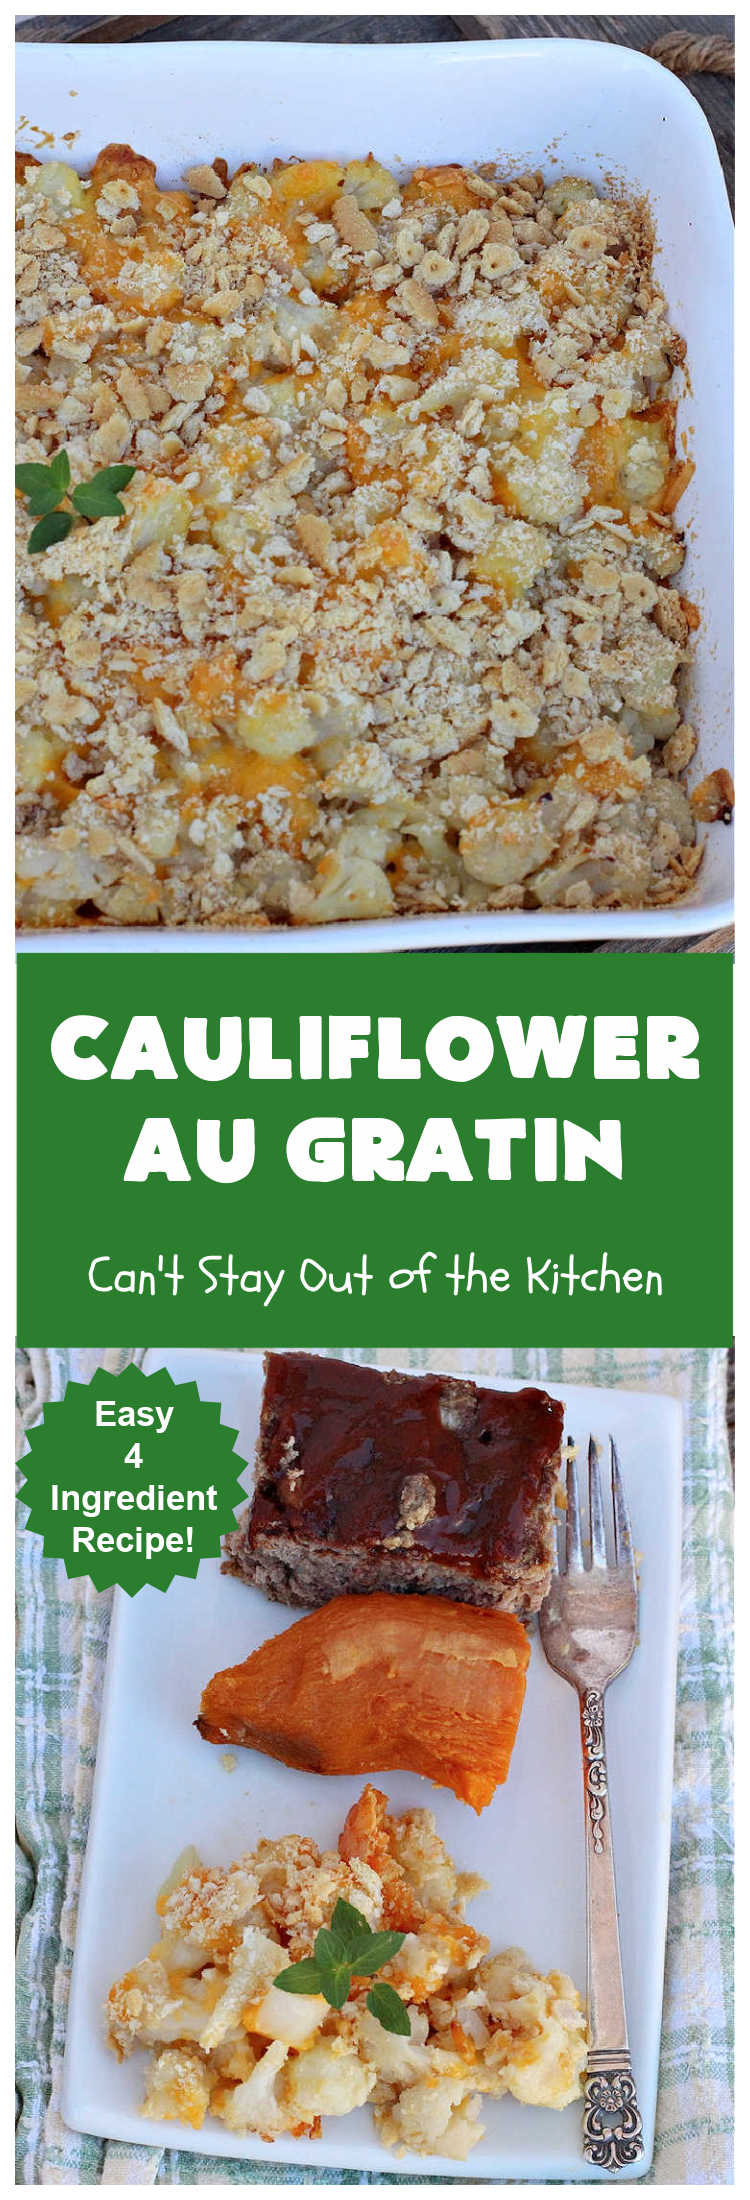 Cauliflower Au Gratin | Can't Stay Out of the Kitchen | the most incredibly easy 4-ingredient #SideDish #recipe ever! So cheesy & delicious. Terrific for #Thanksgiving, #Christmas or regular dinner menus. #cauliflower #CheddarCheese #RitzCrackers #4IngredientRecipe #CauliflowerAuGratin